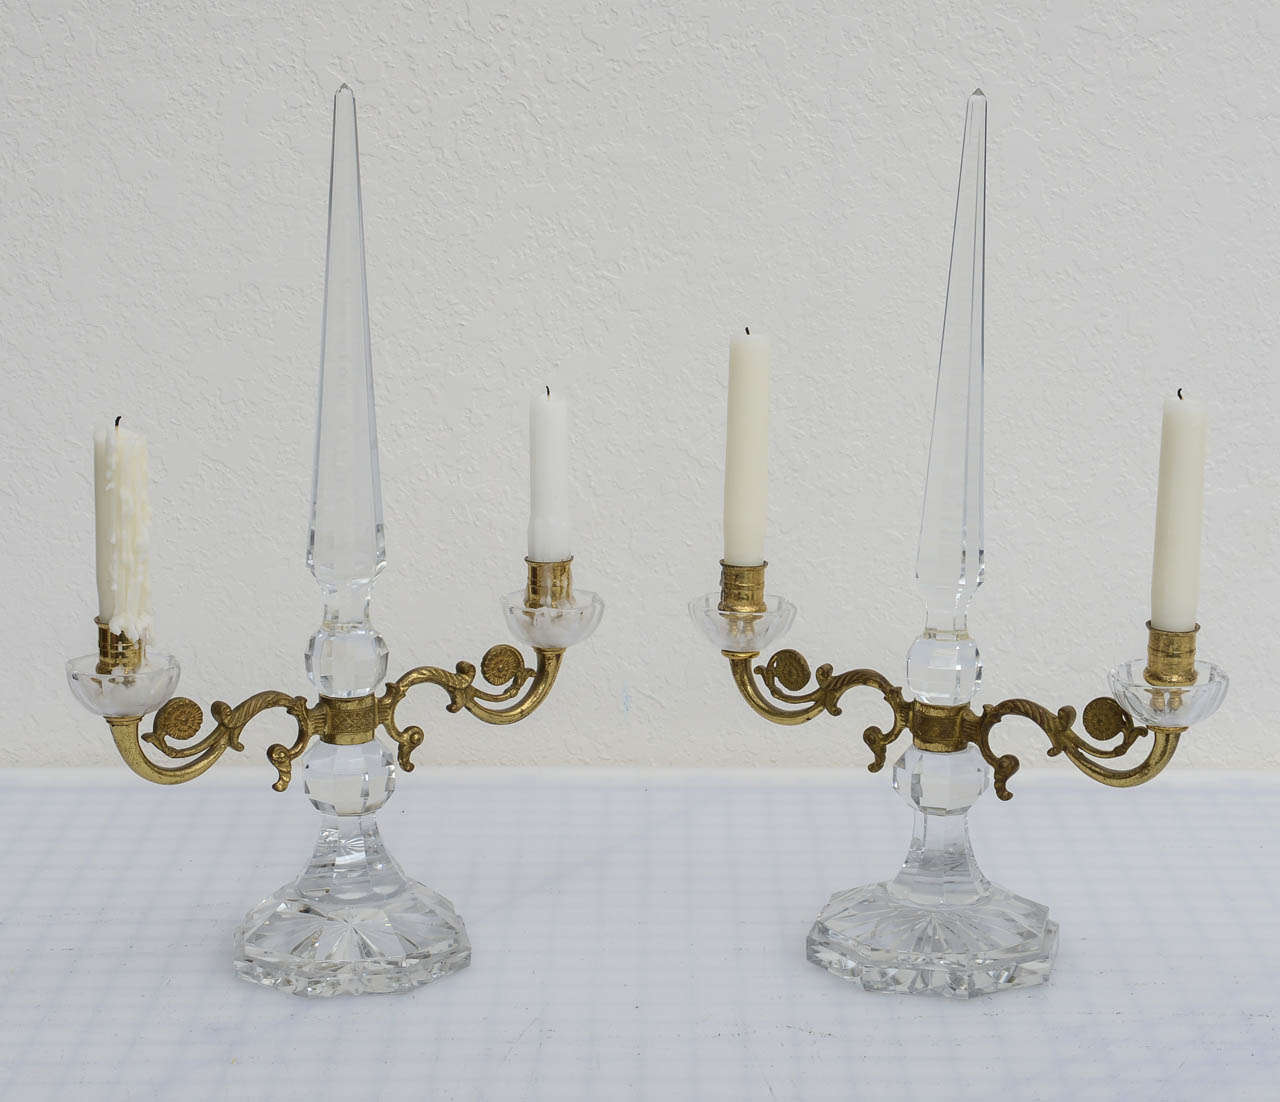 Stunning pair of crystal and bronze table candelabras.    Wonderful detailed bronze arms with .cut crystal obelisk's rise from the center with cut crystal disks and detailed work continuing to the base.

Originally $ 3,850.00